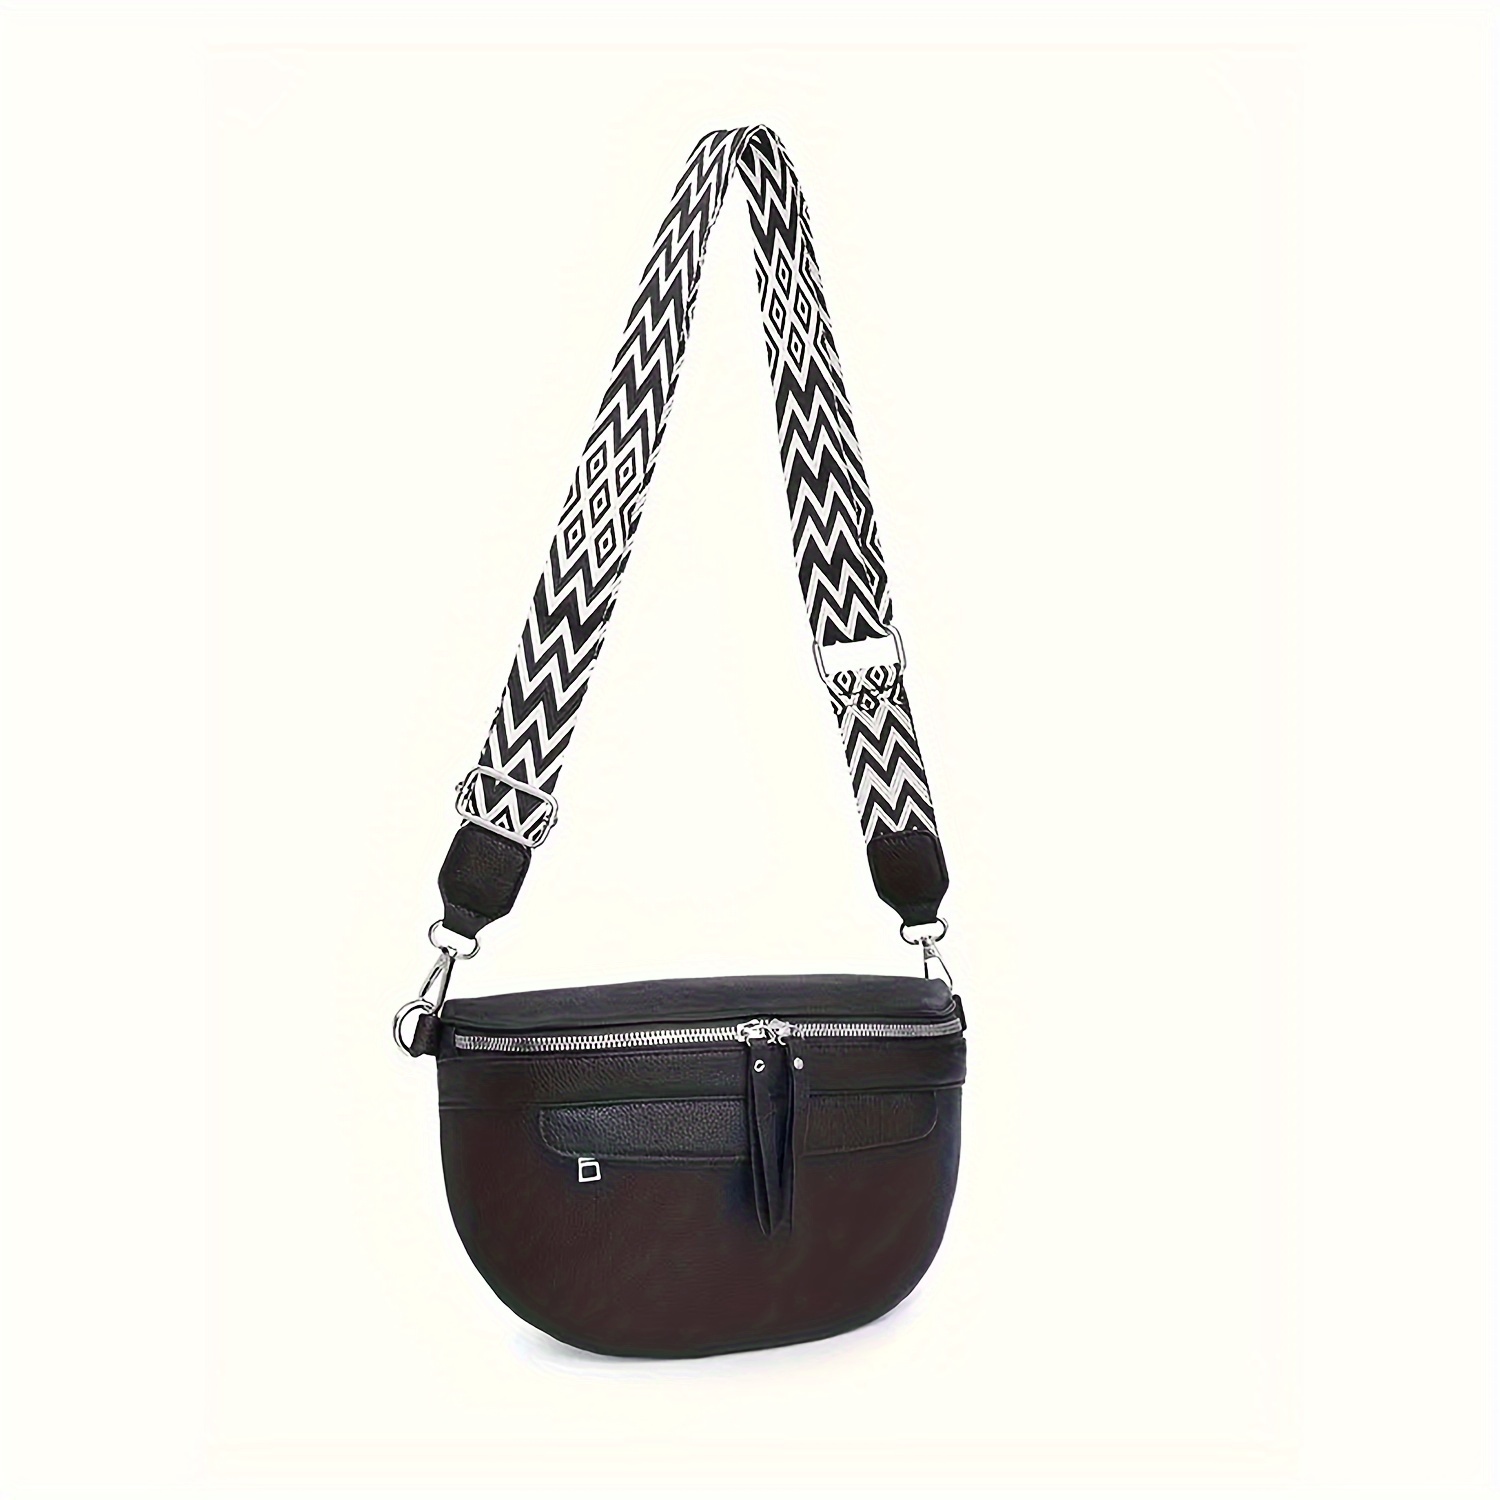 

Adjustable Geometric Strap Fashion Chest Bag, Fanny Pack Crossbody Bag, Versatile Hip Pouch For Casual Outings